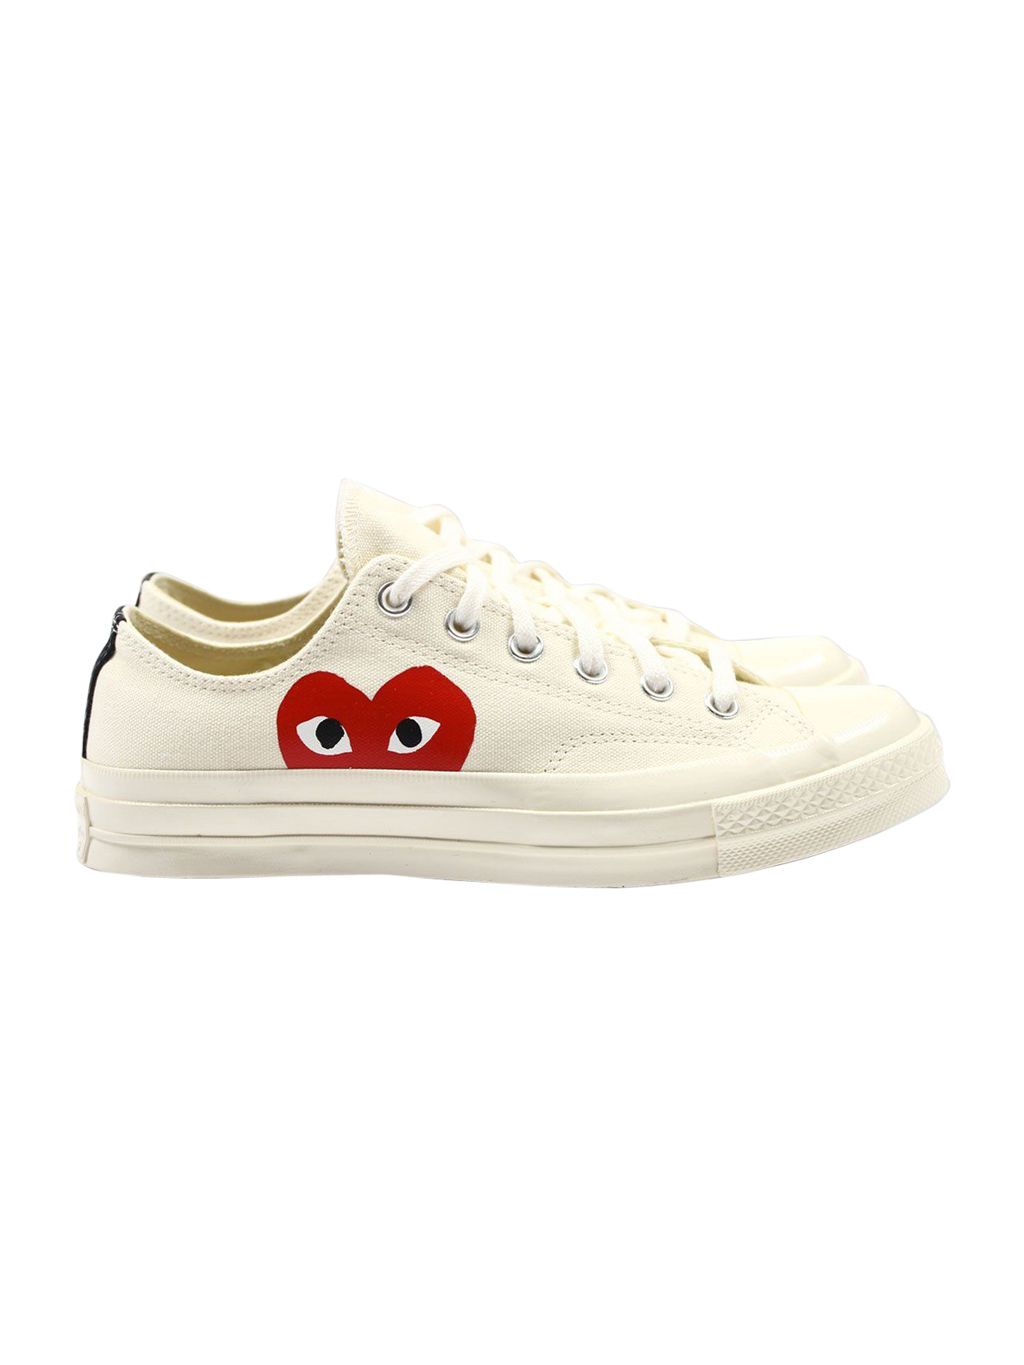 converse red heart shoes